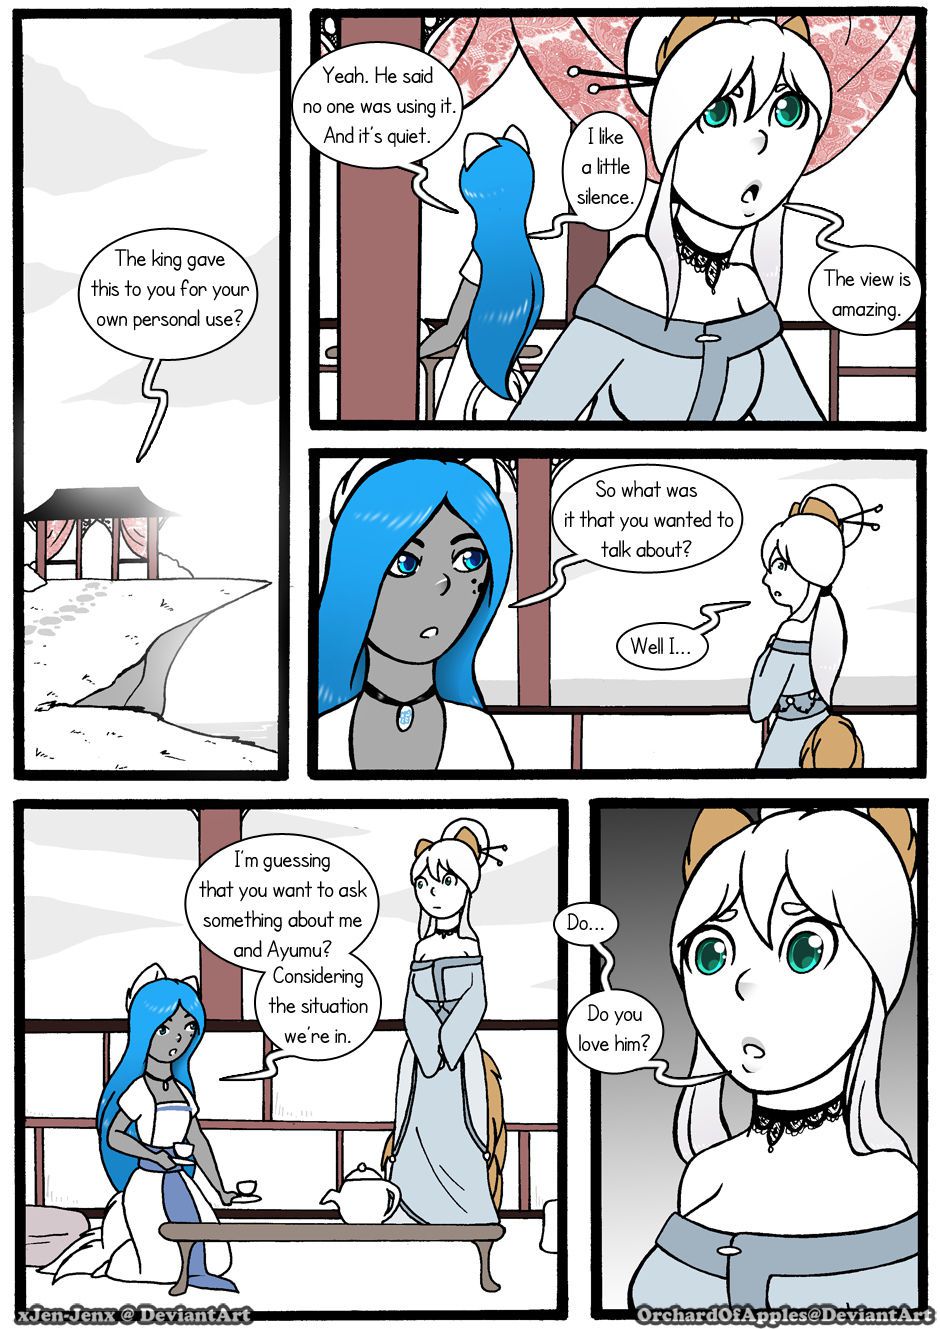 [Jeny-jen94] Between Kings and Queens [Ongoing] 212